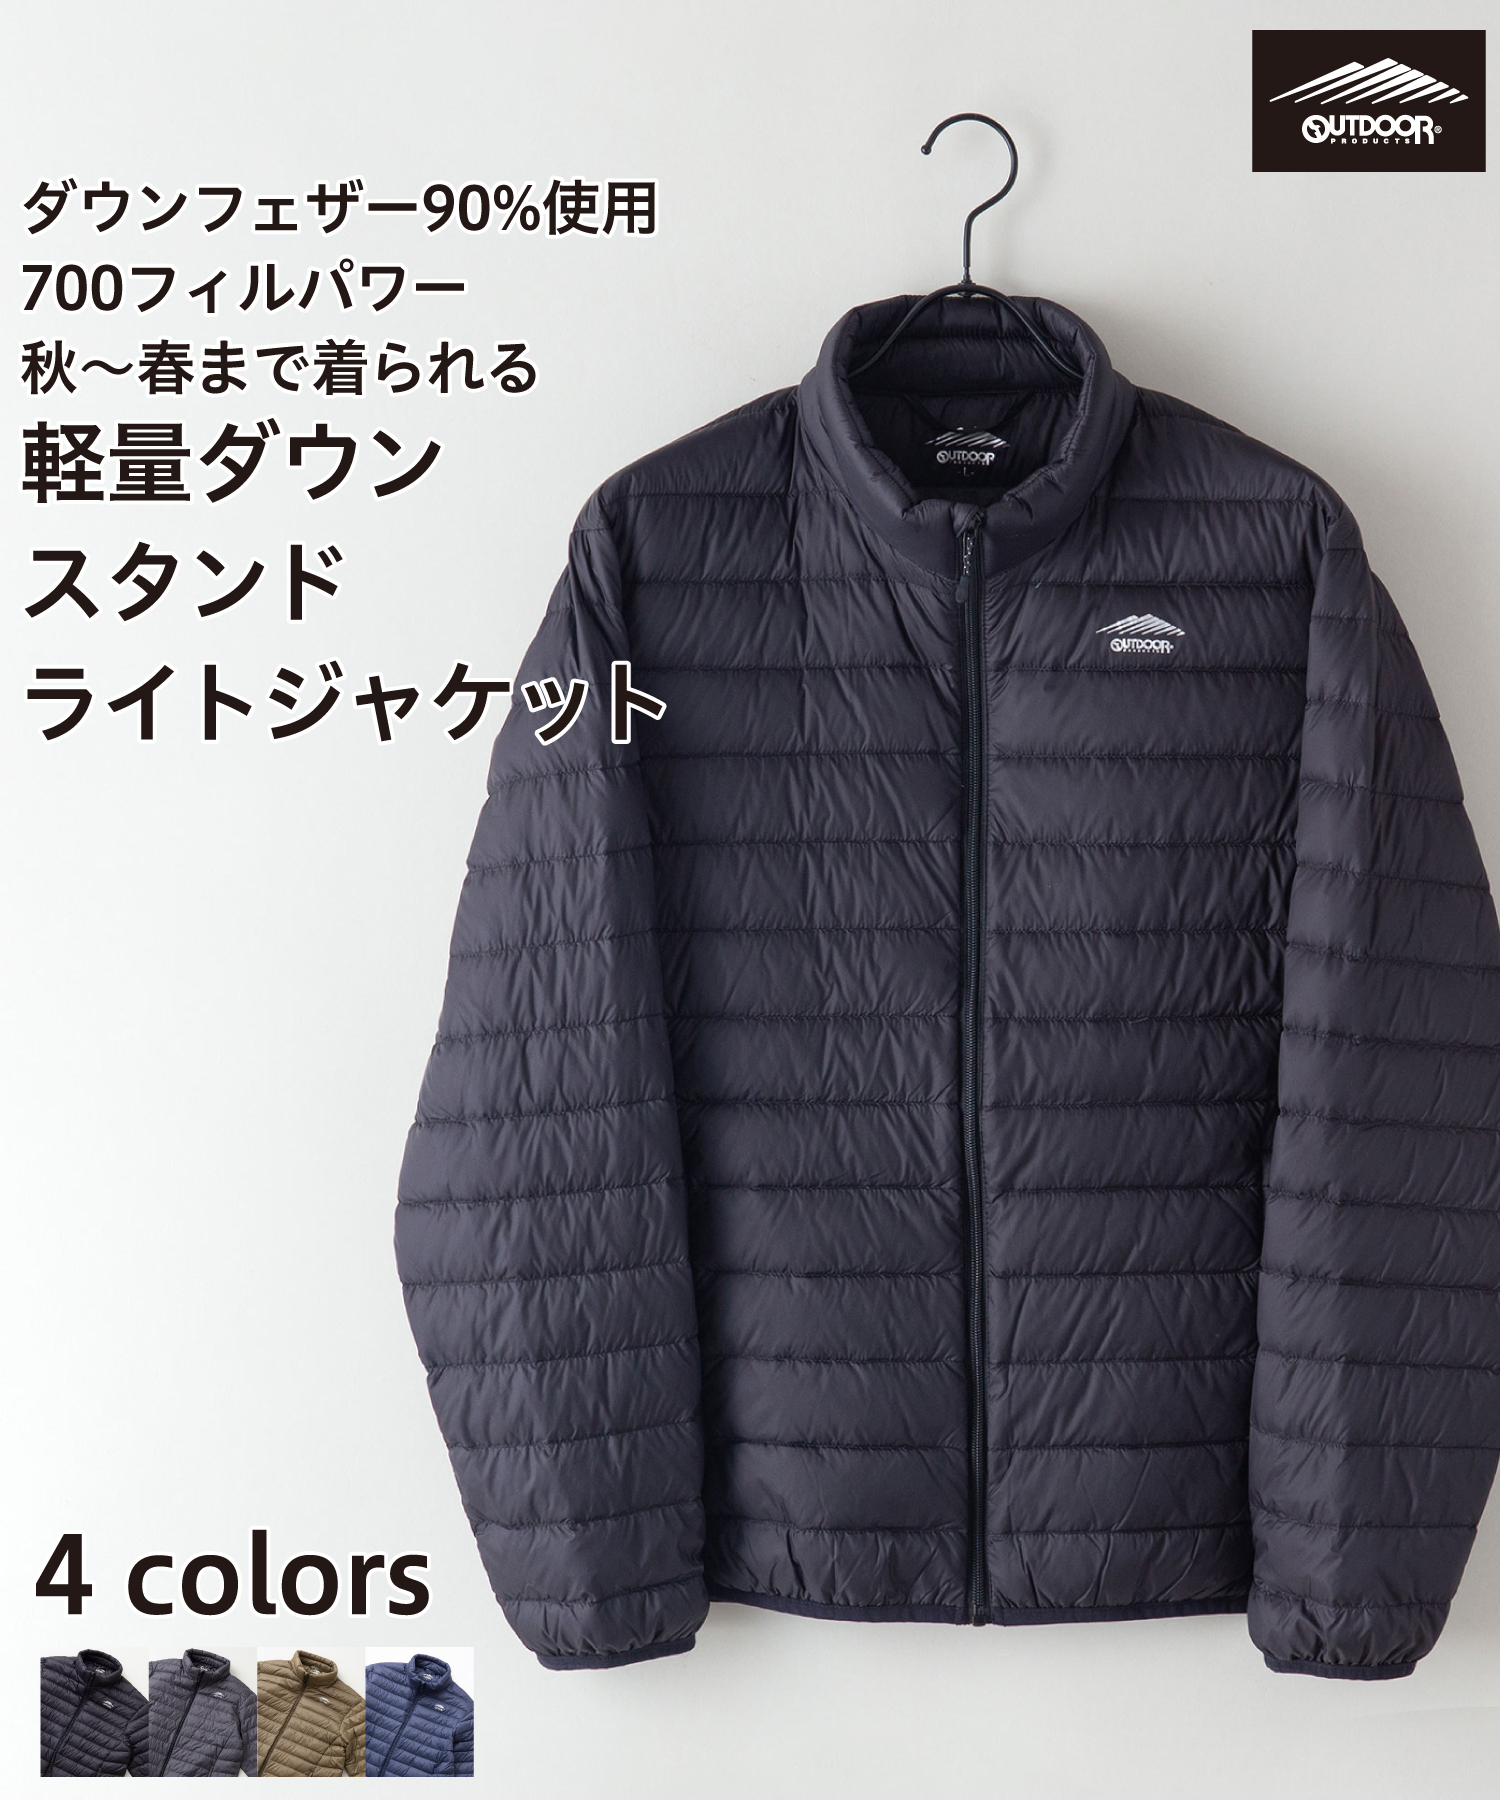 【OUTDOORPRODUCTS】ダウン90％ 700フィルパワー 超軽量透